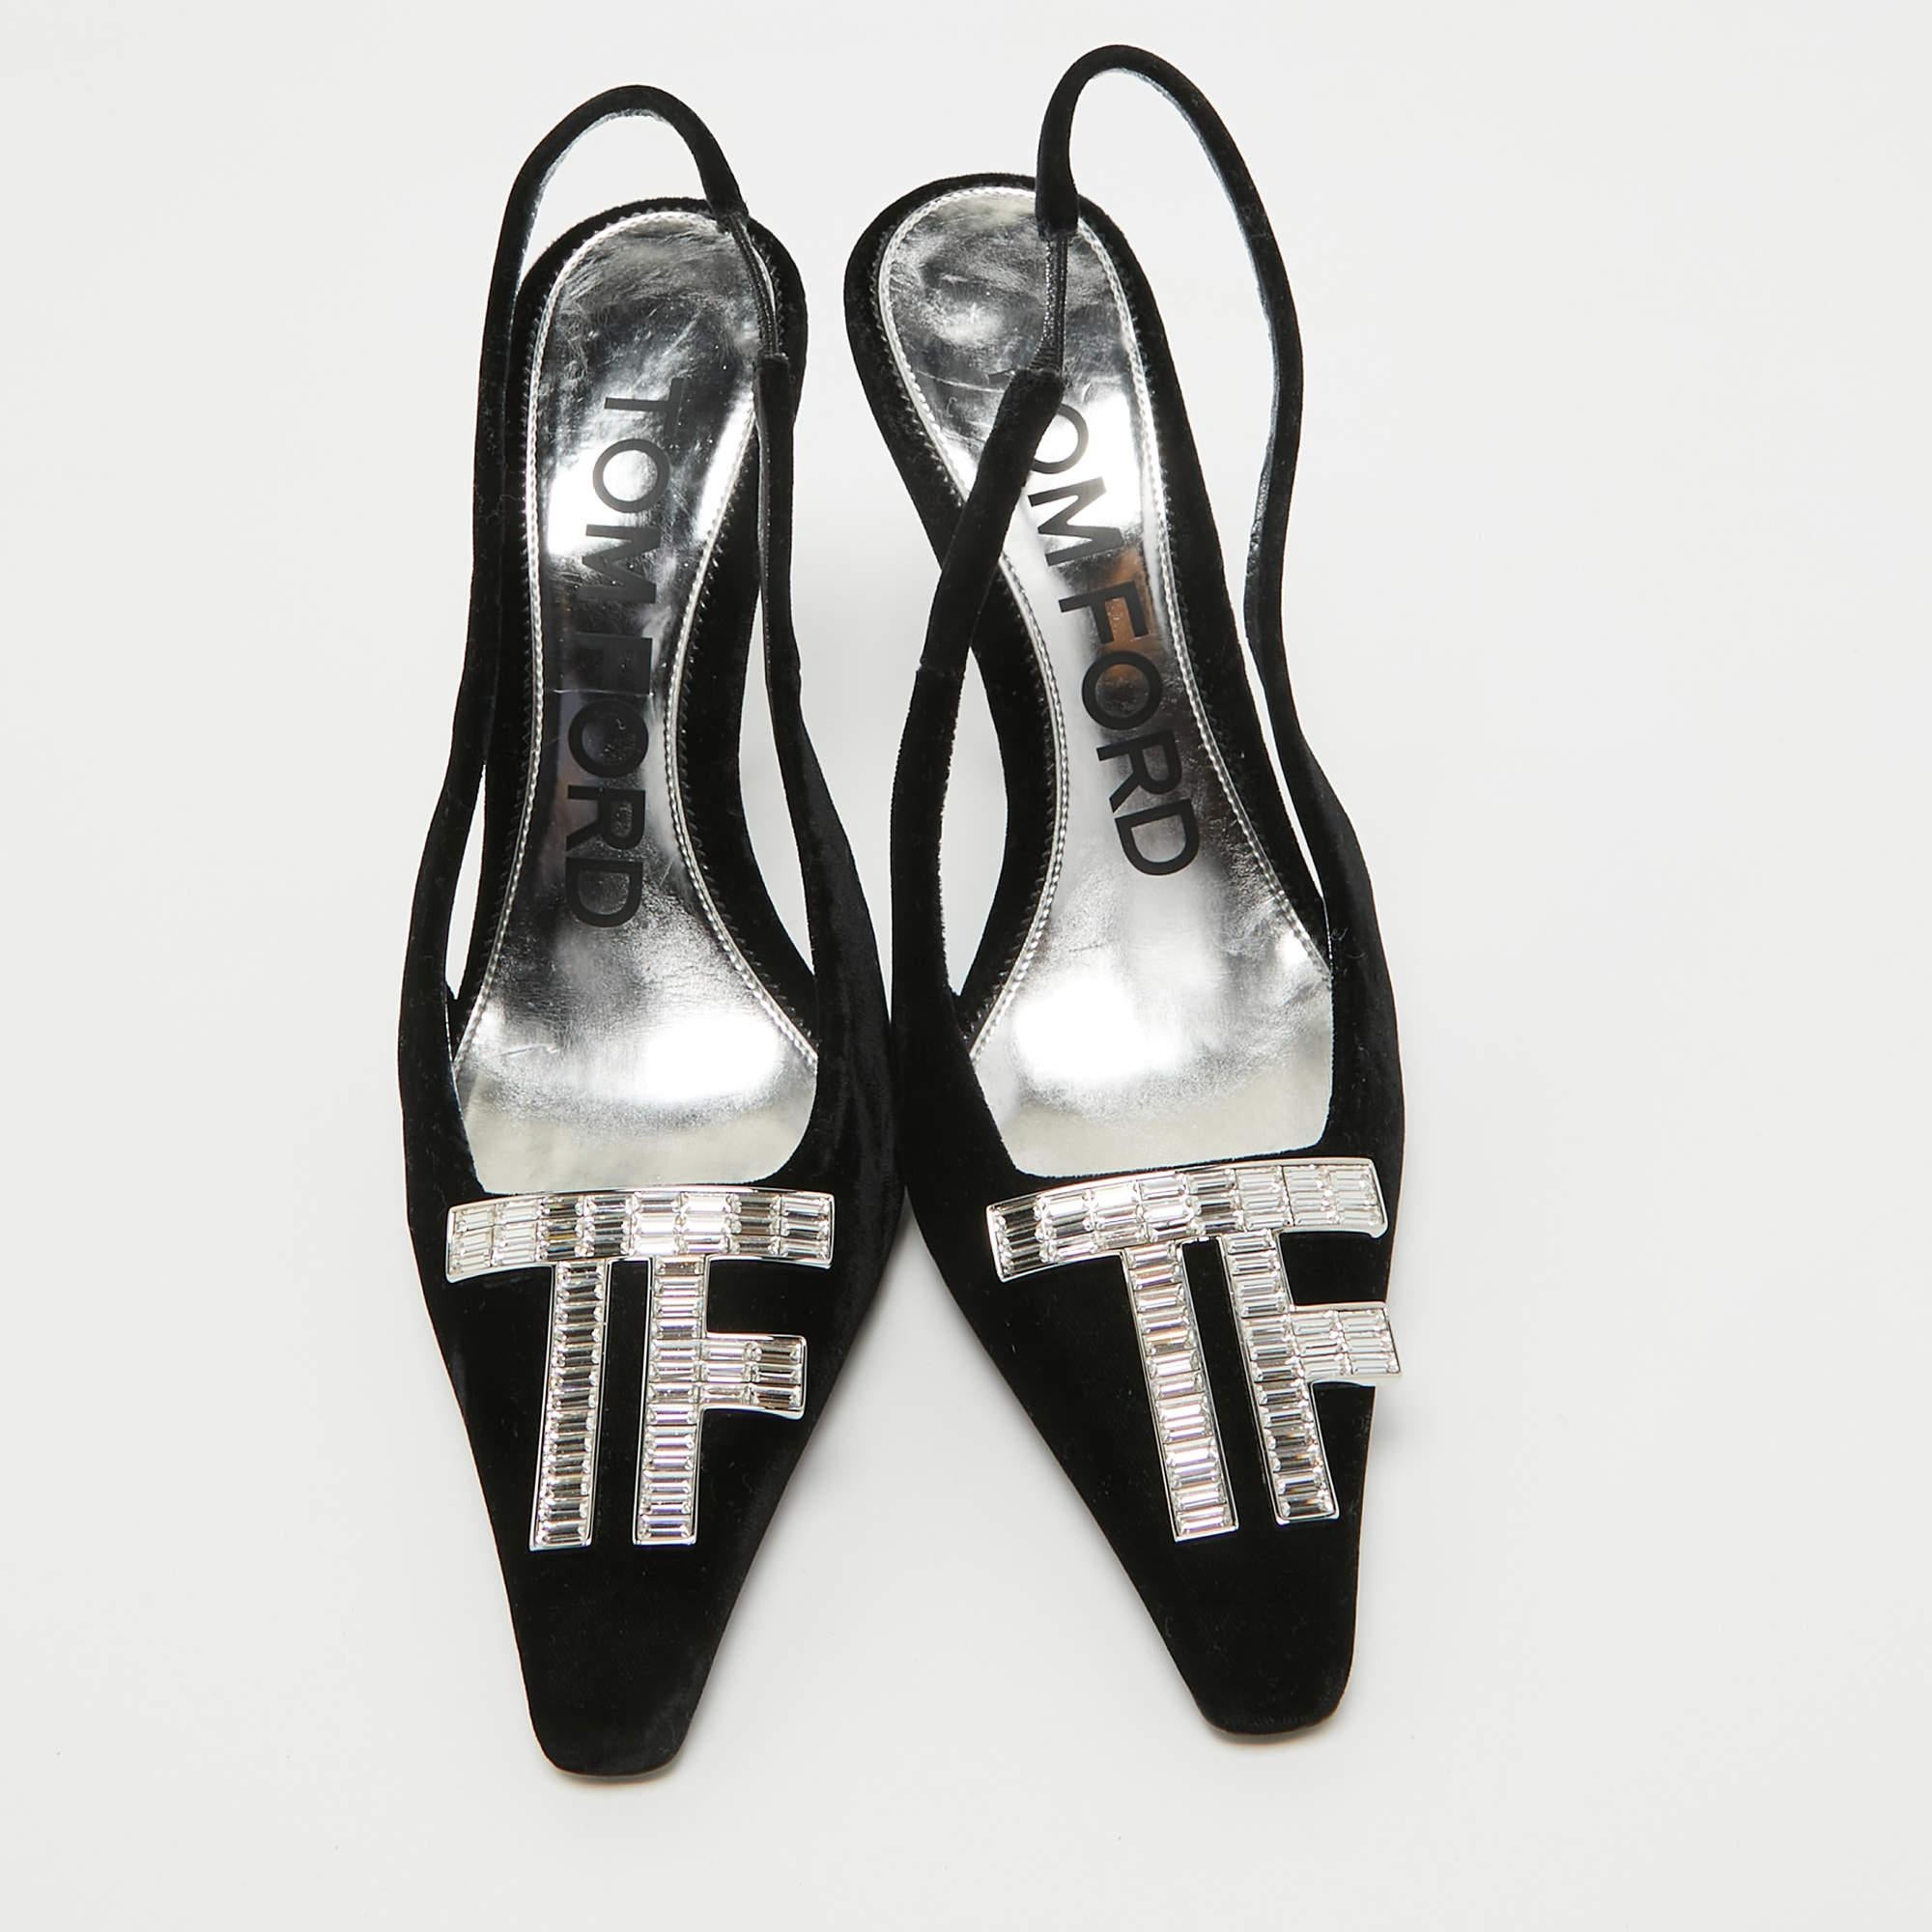 You can count on these Tom Ford slingback pumps for an elevated feel. They are crafted beautifully and designed to offer the right fit and a comfortable lift.

